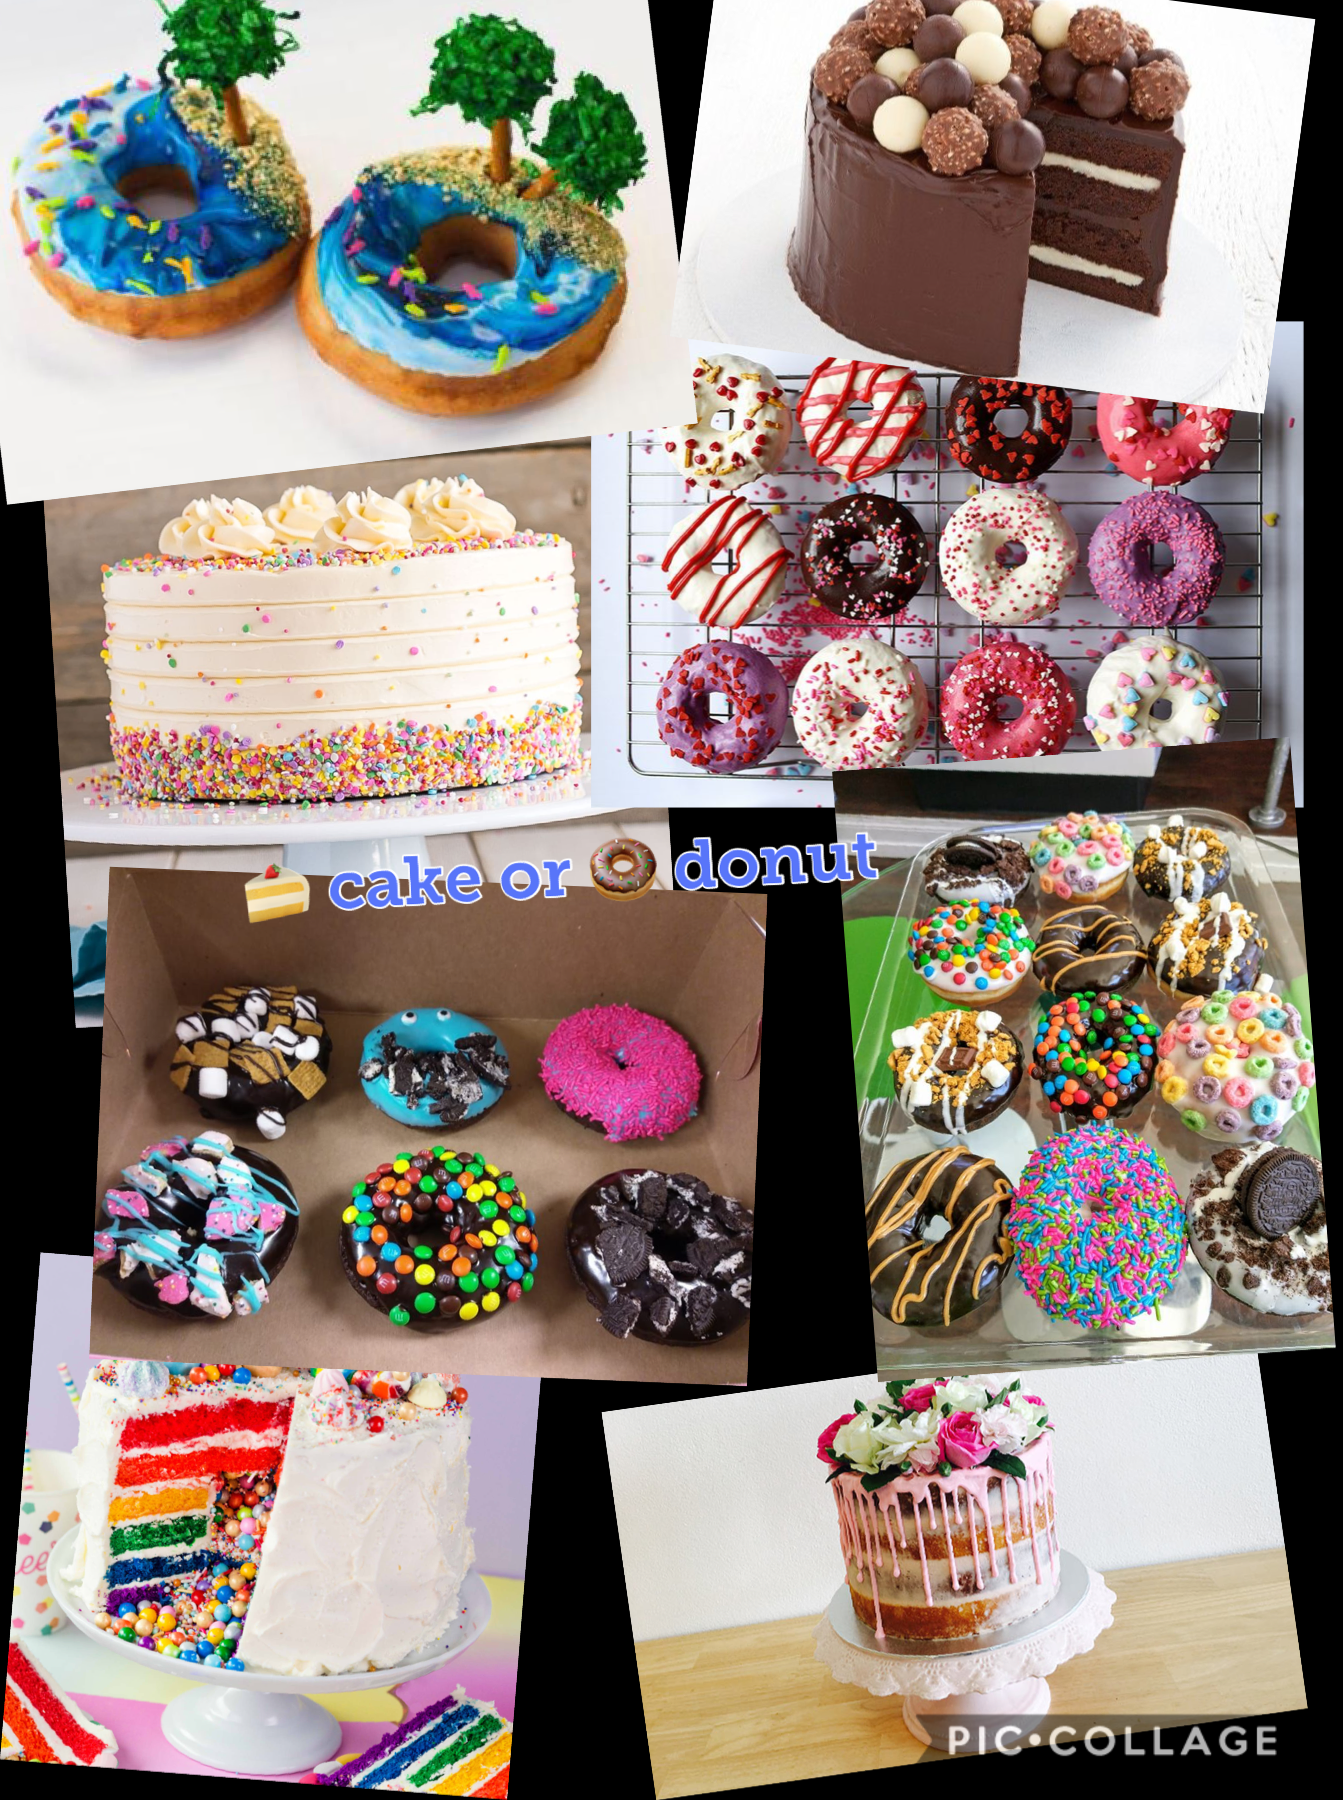 What do you choose?? Comment what you would prefer cake or donuts